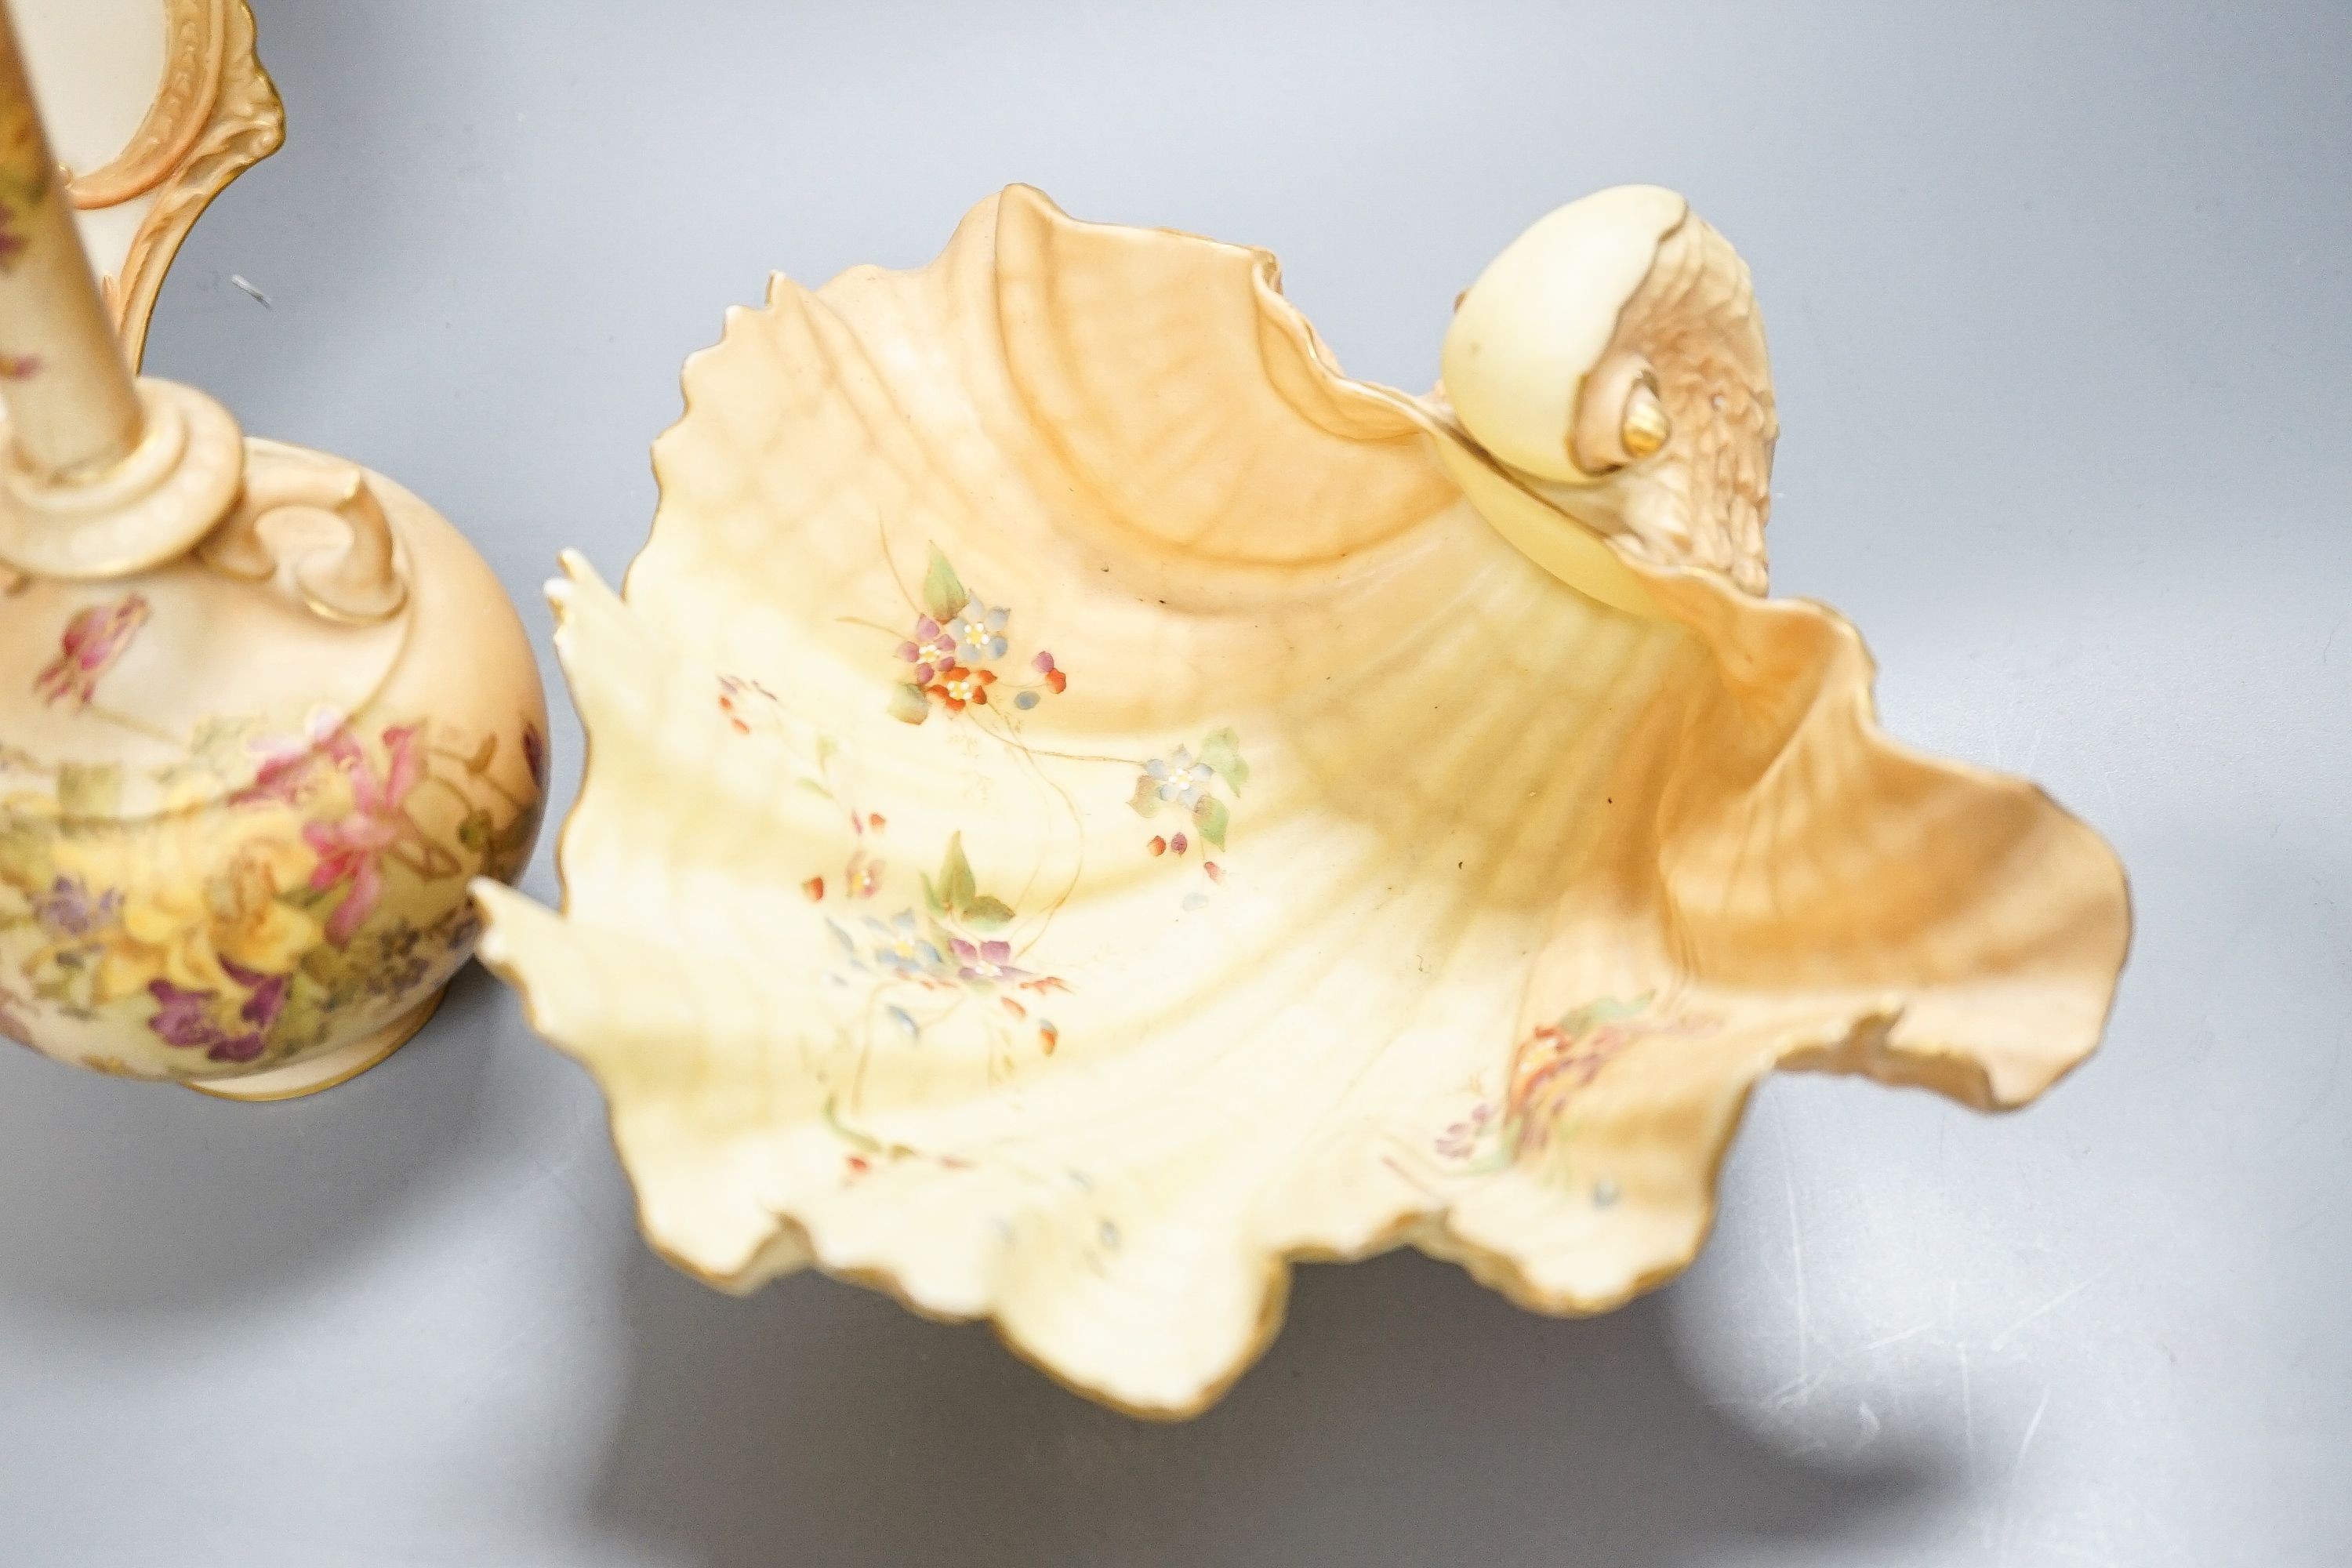 A group of ornamental Royal Worcester blush ivory ground items, including a shell dish, 18cm wide, two vases, a dish etc.